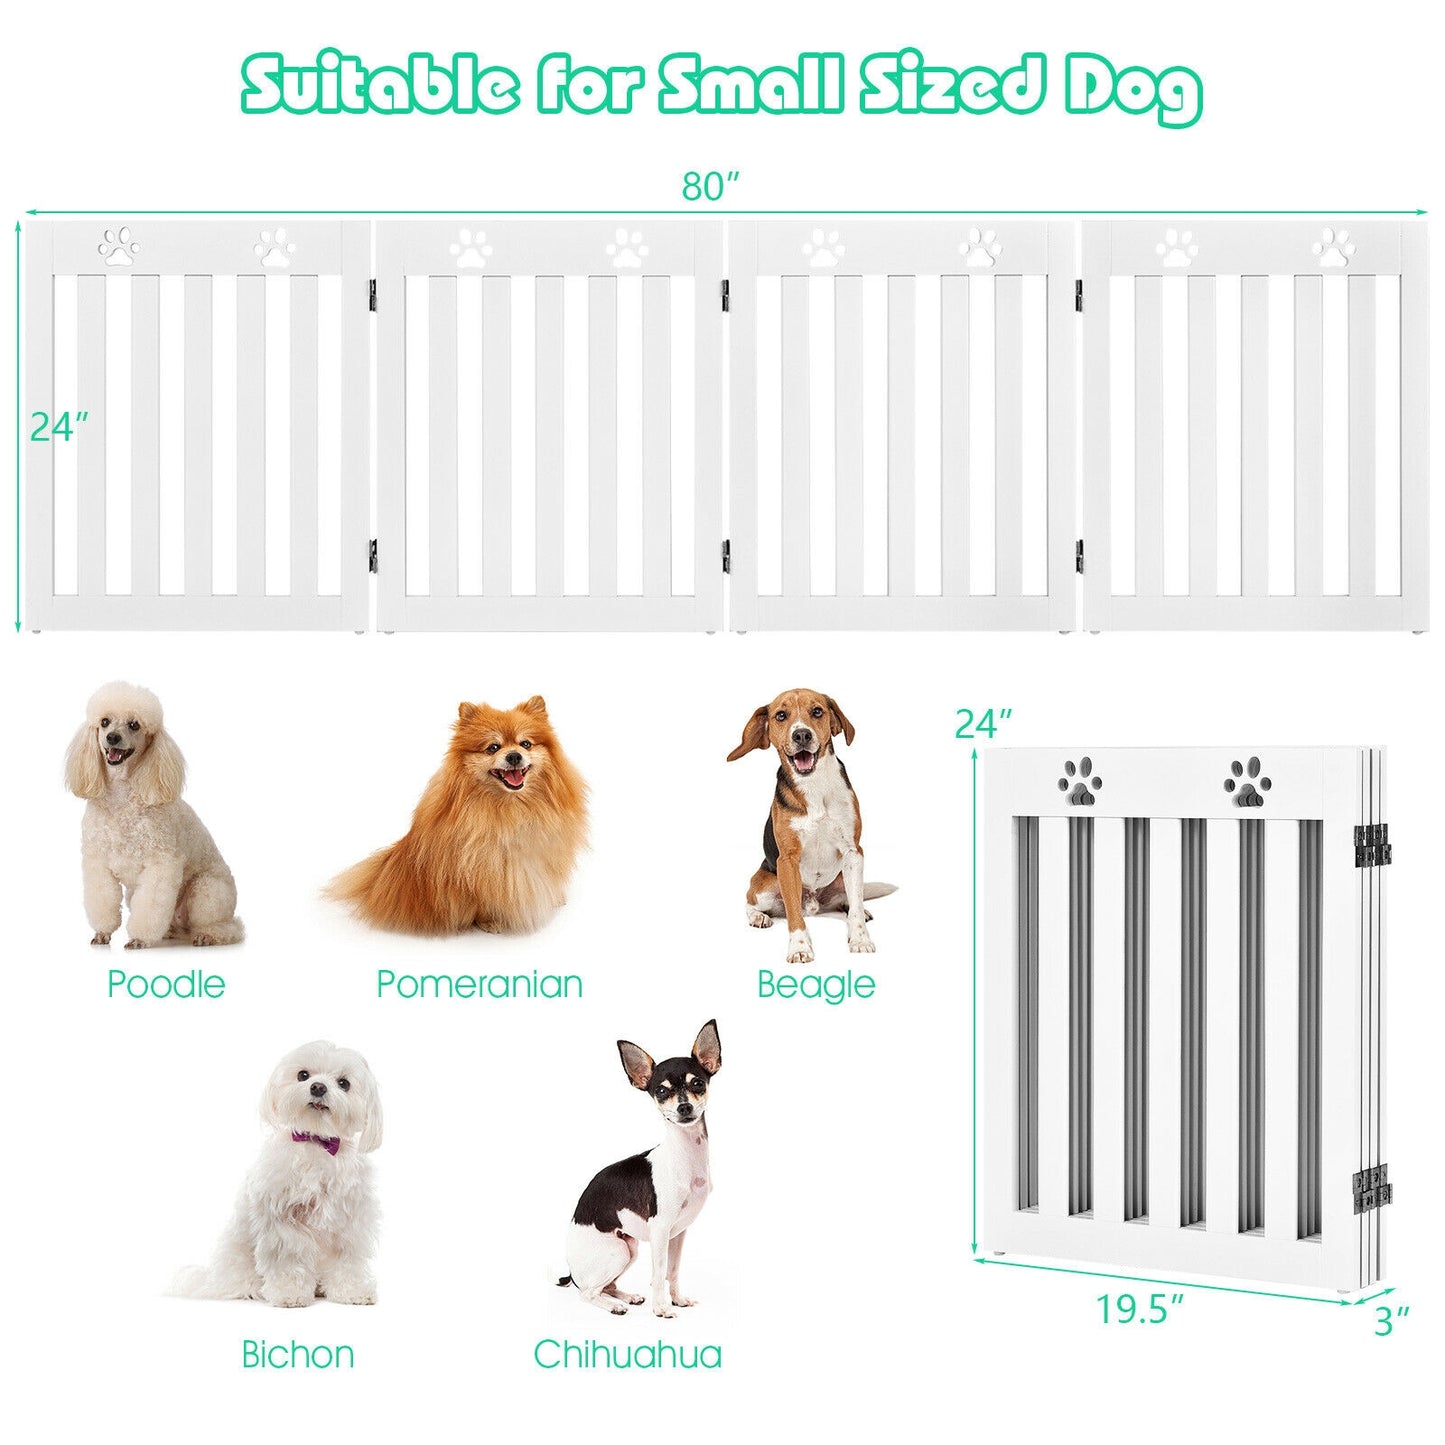 24 Inch Folding Wooden Freestanding Pet Gate Dog Gate with 360° Hinge -White